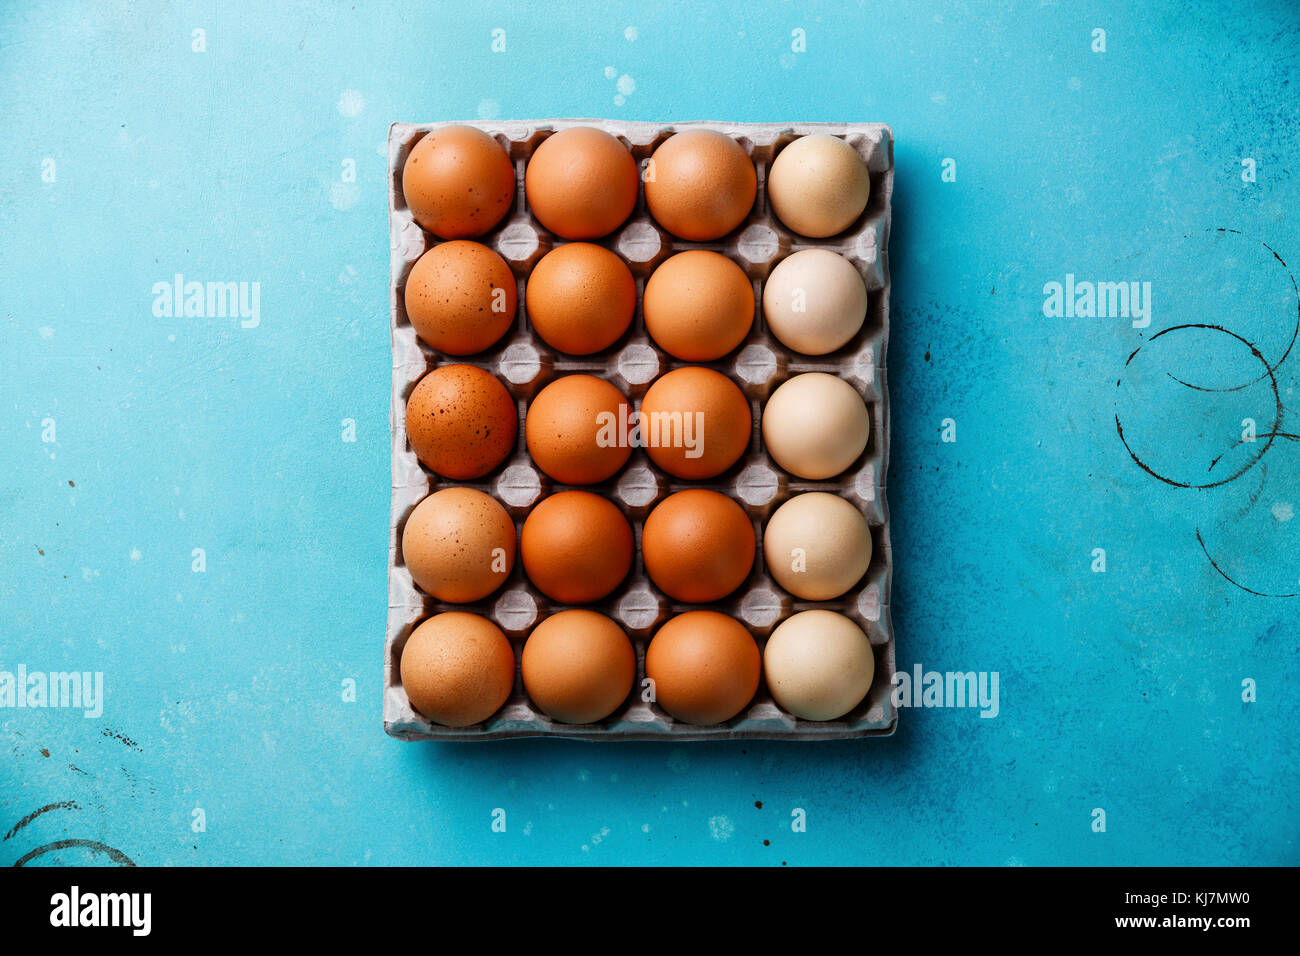 Fresh brown and speckled chicken Eggs in eco cardboard paper tray container on blue background Stock Photo